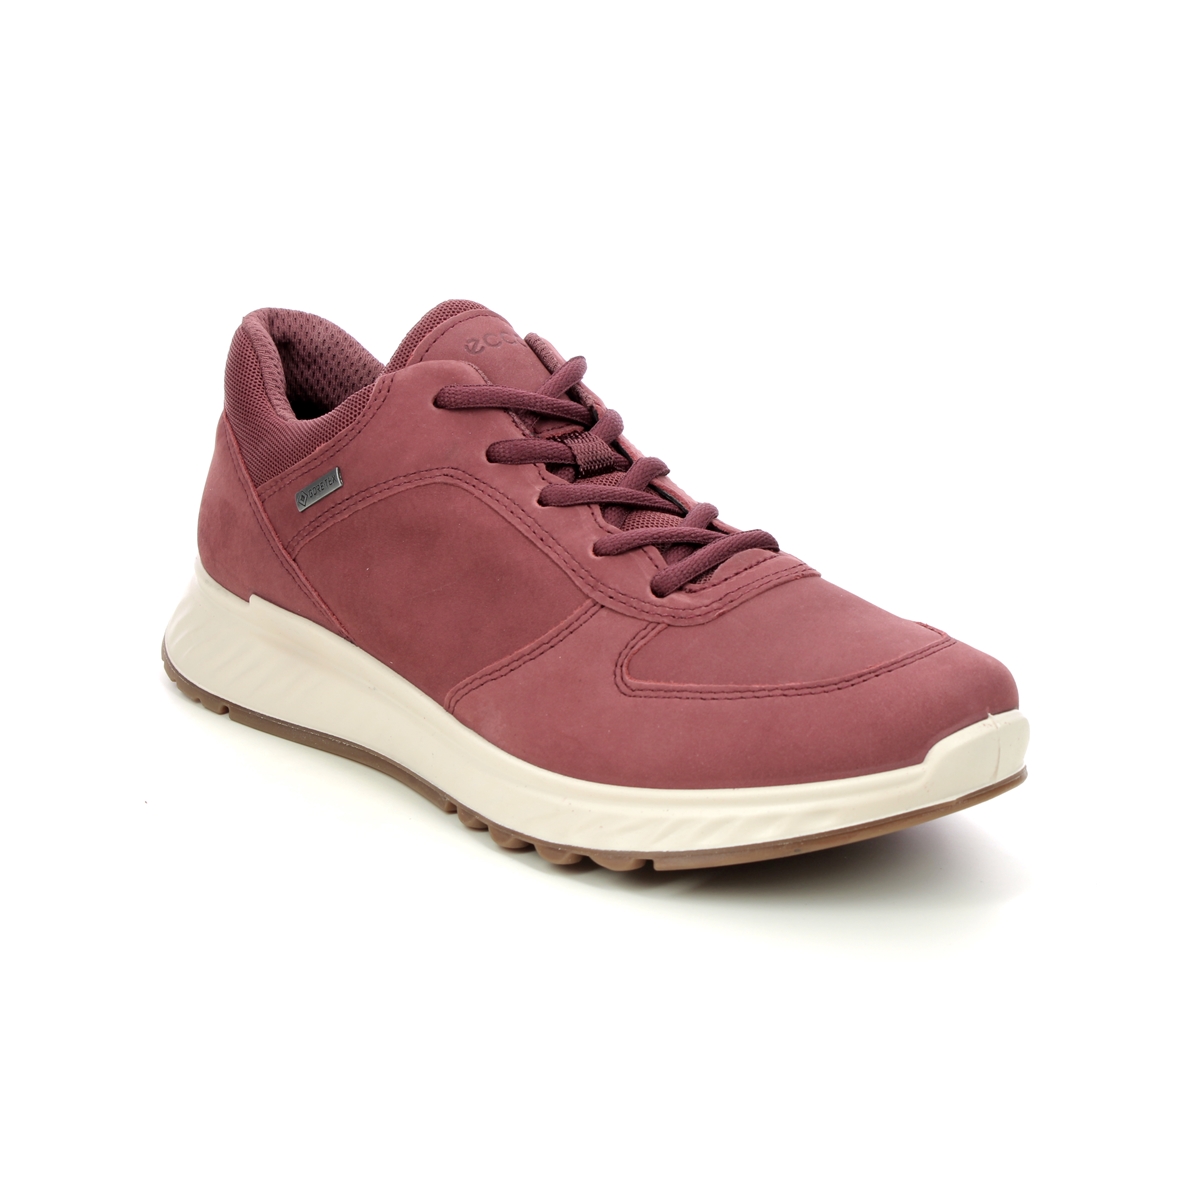 ECCO Exostride Gore Dark Rose Womens Walking Shoes 835303-02588 in a Plain Leather in Size 42